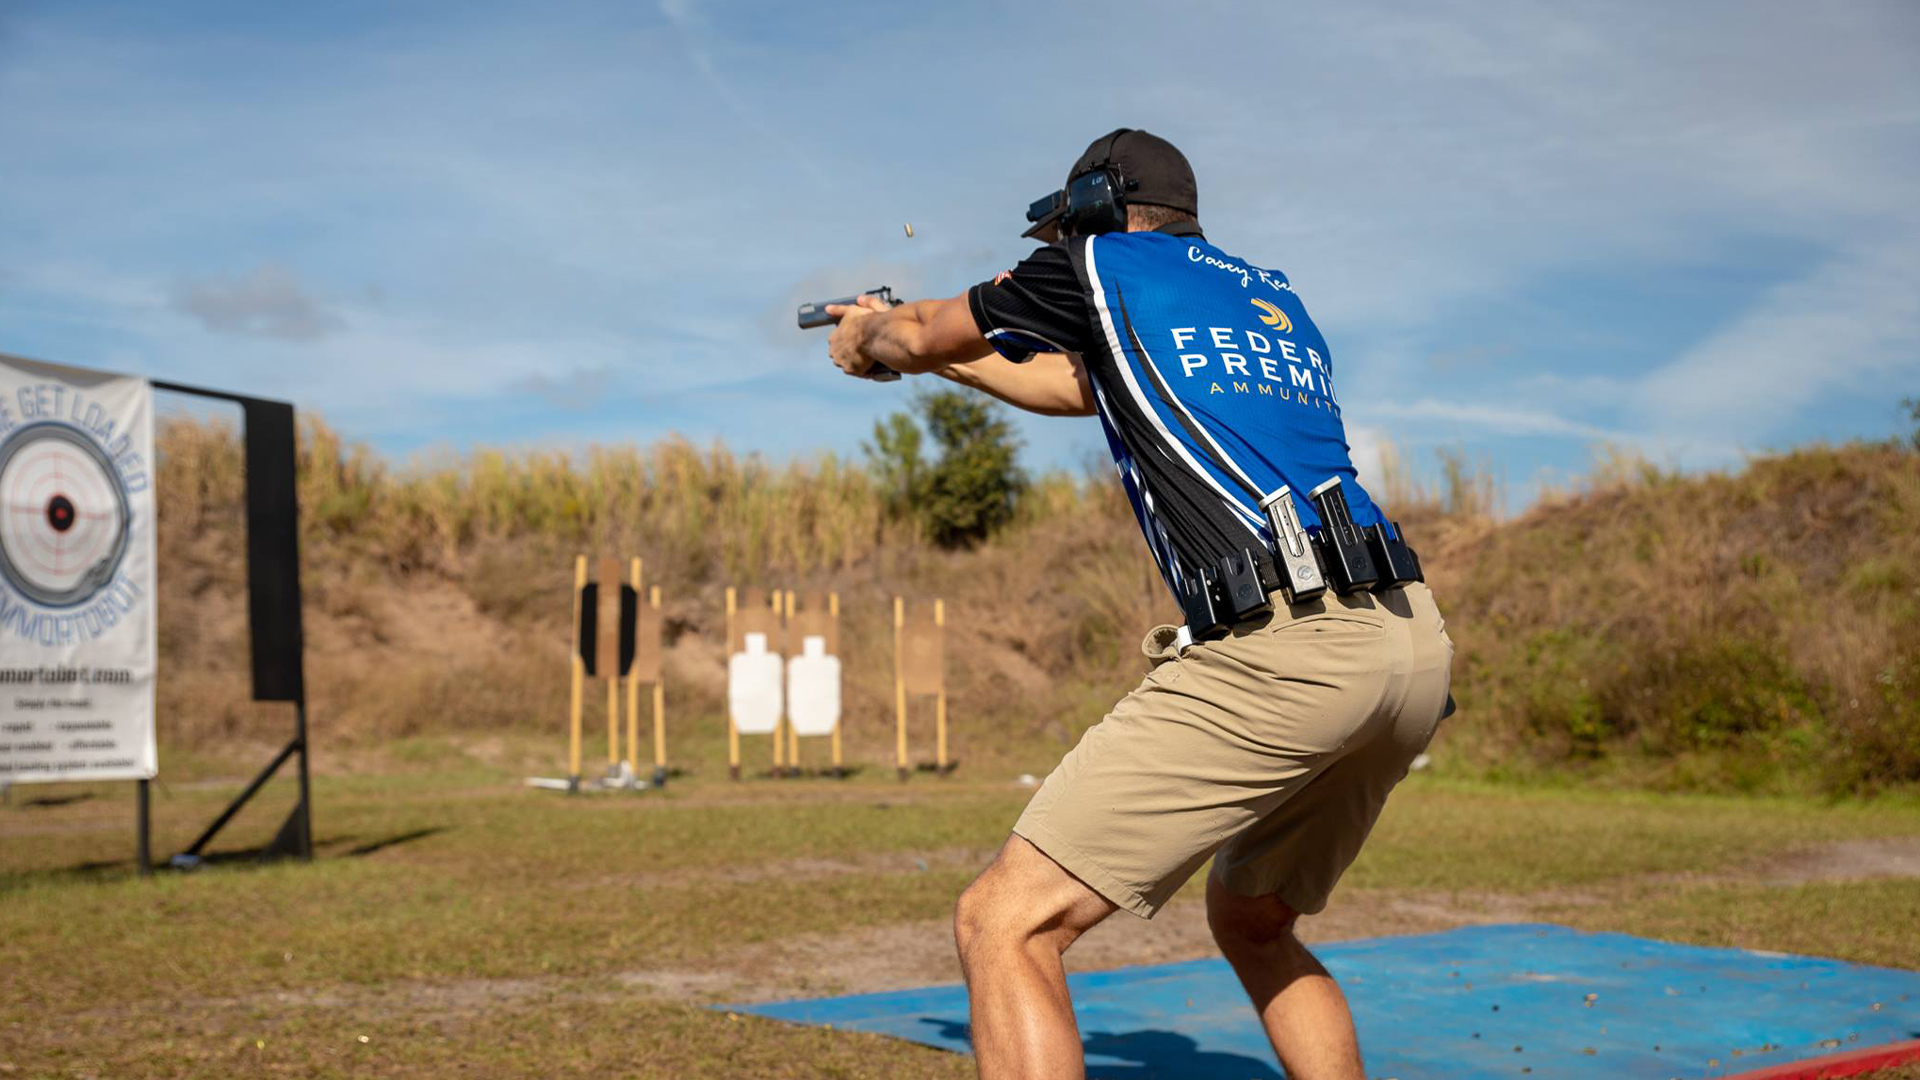 Casey Reed in competition with Tanfoglio pistol